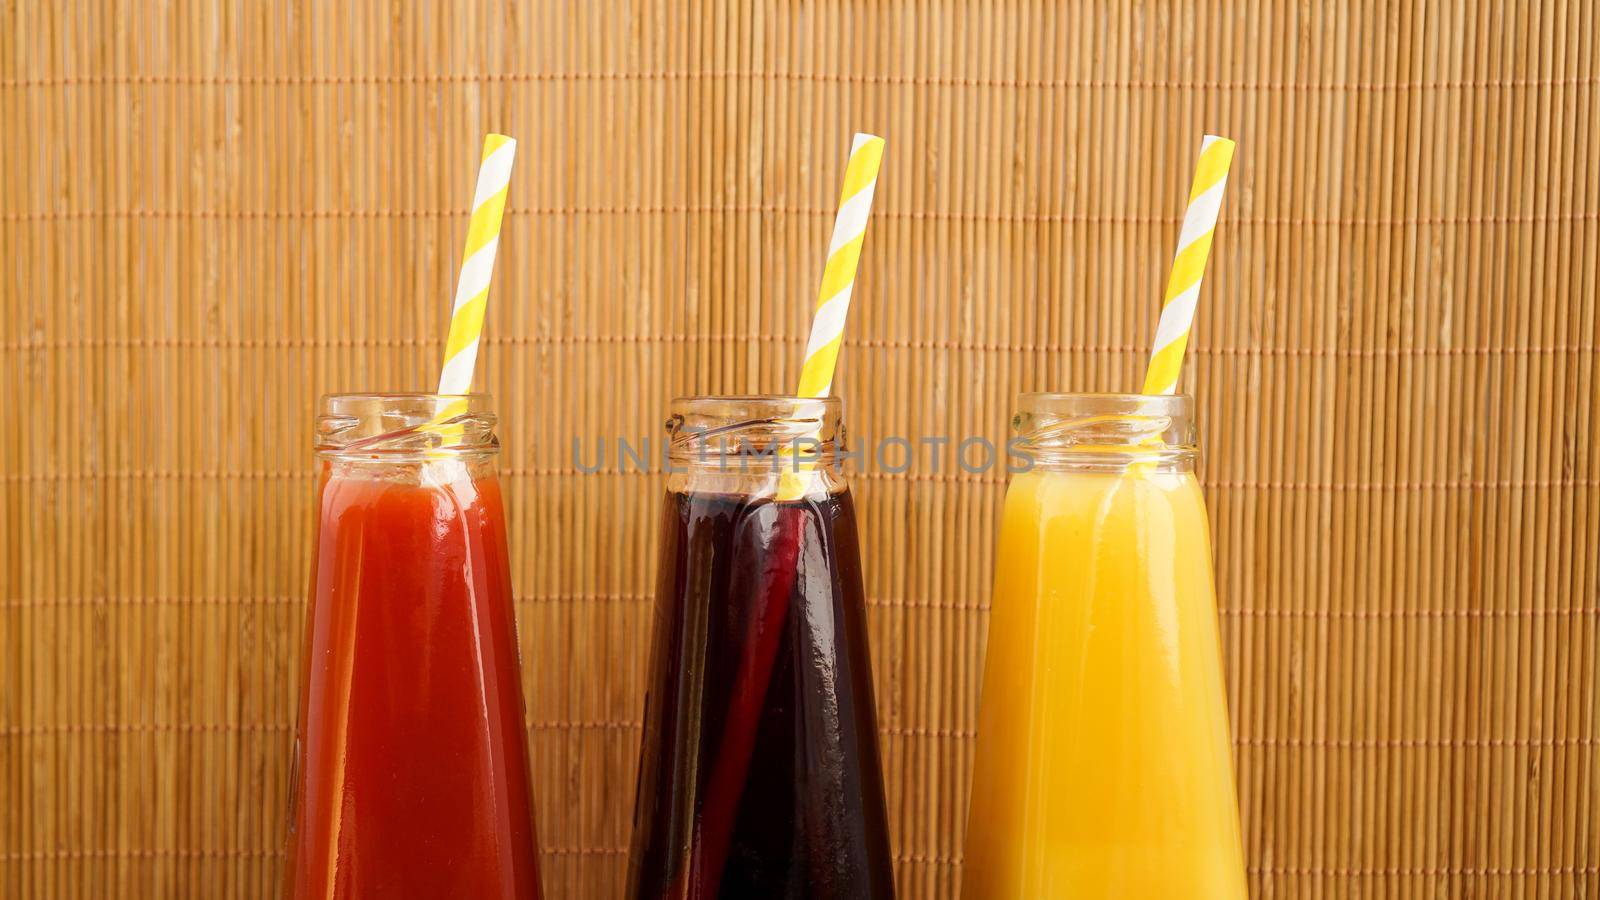 Three multicolored drinks in the bottles on a wooden bamboo background. Bottled paper straws.